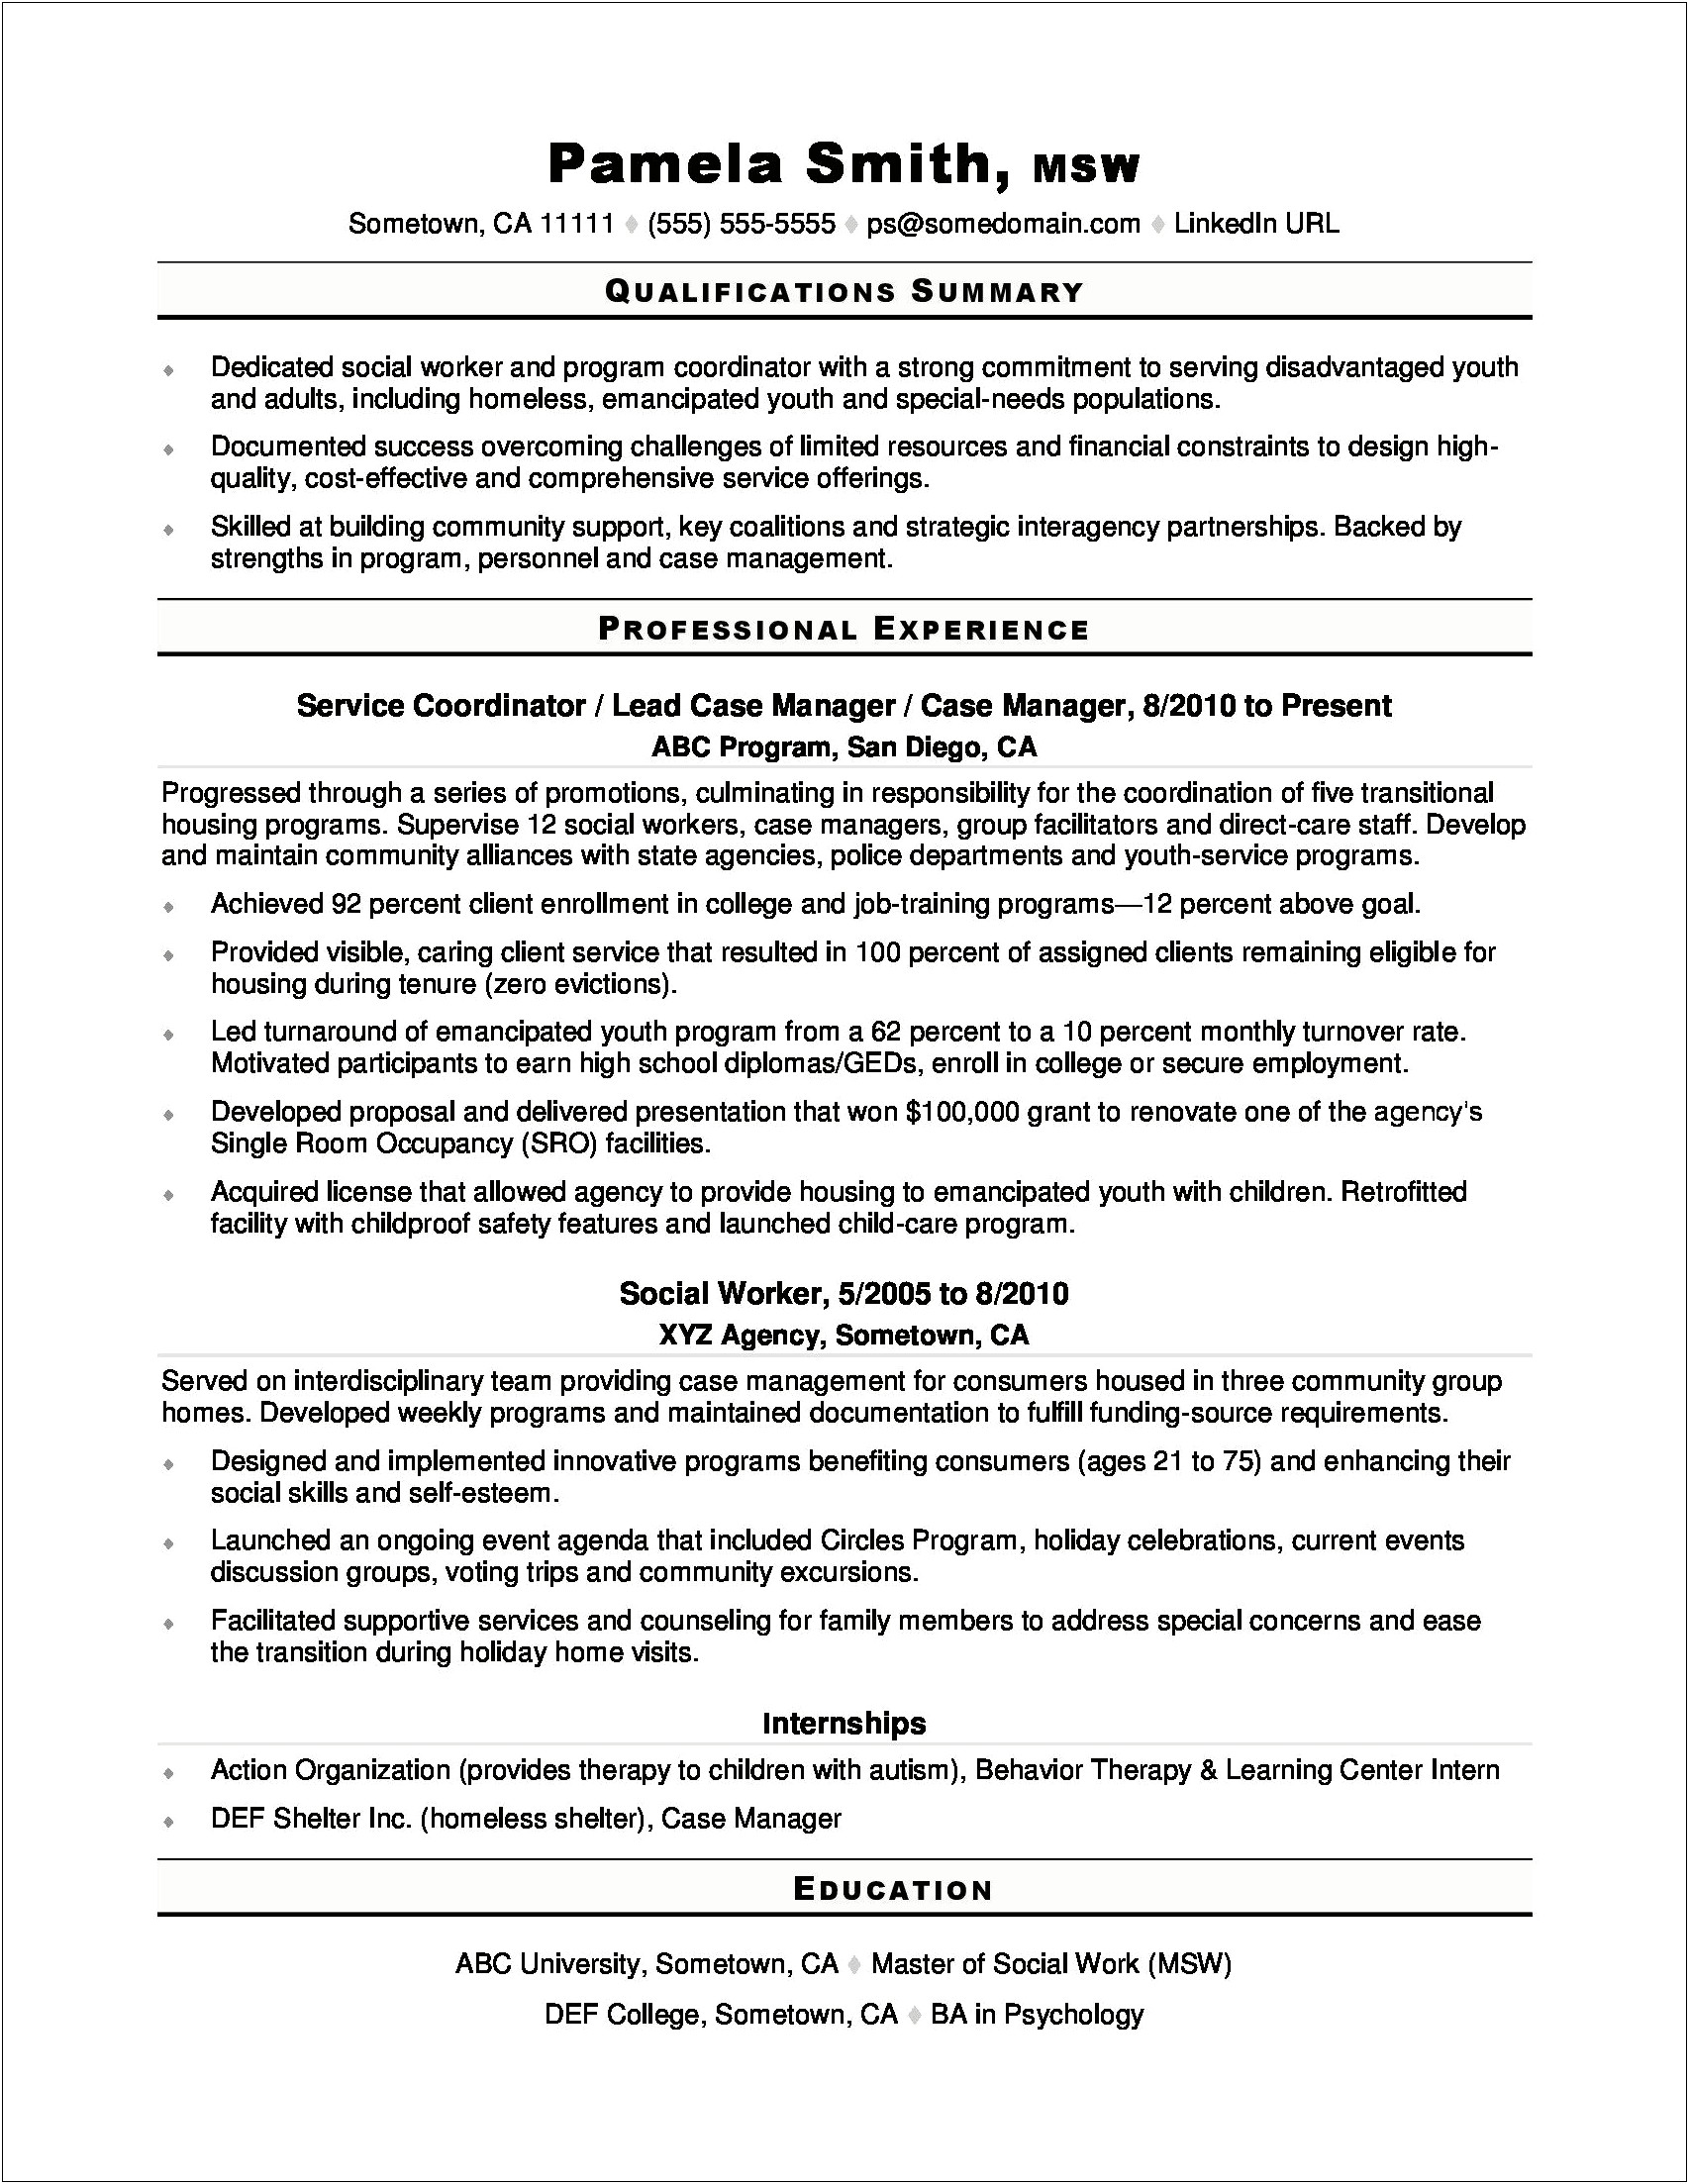 Examples Of Community Health Worker Resumes